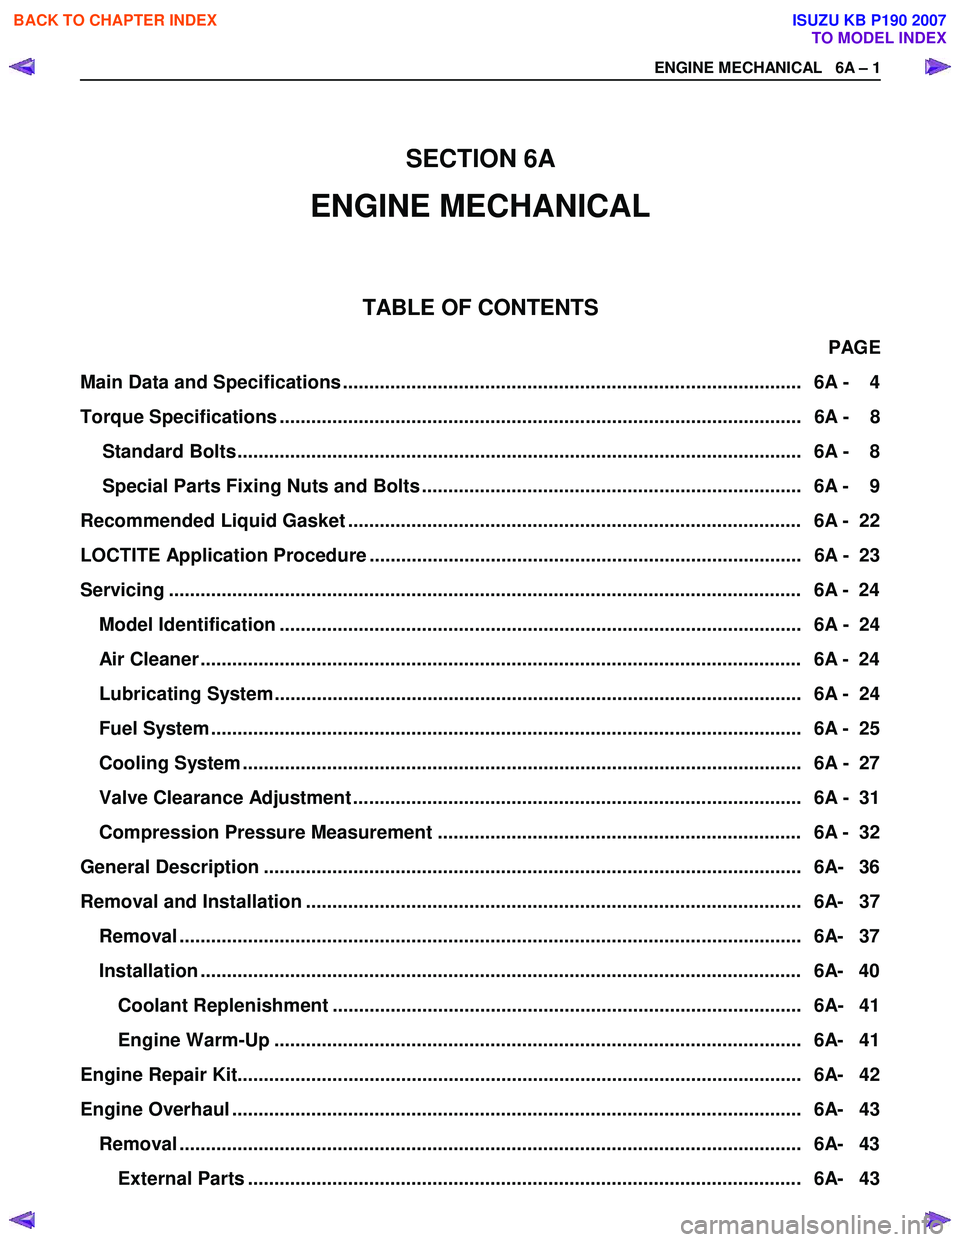 ISUZU KB P190 2007  Workshop Repair Manual   
 
SECTION 6A 
ENGINE MECHANICAL 
  
 
TABLE OF CONTENTS 
PAGE 
4 8  
  Standard Bolts ...........................................................................................................   6